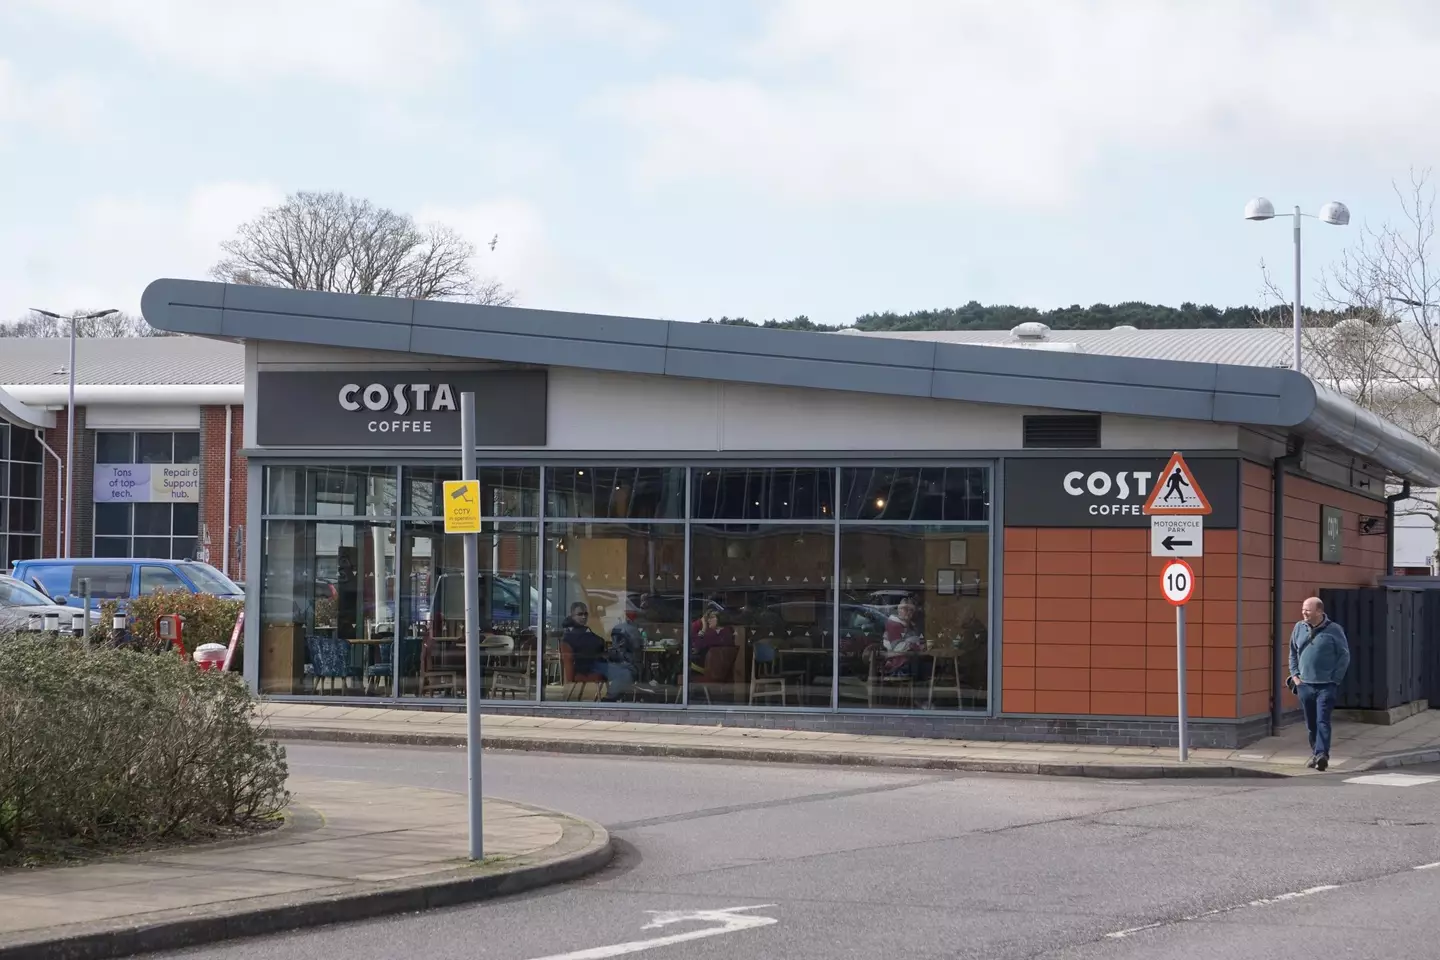 A woman has claimed she wasn't allowed to use the toilets in a Costa Coffee branch because she didn't purchase anything.